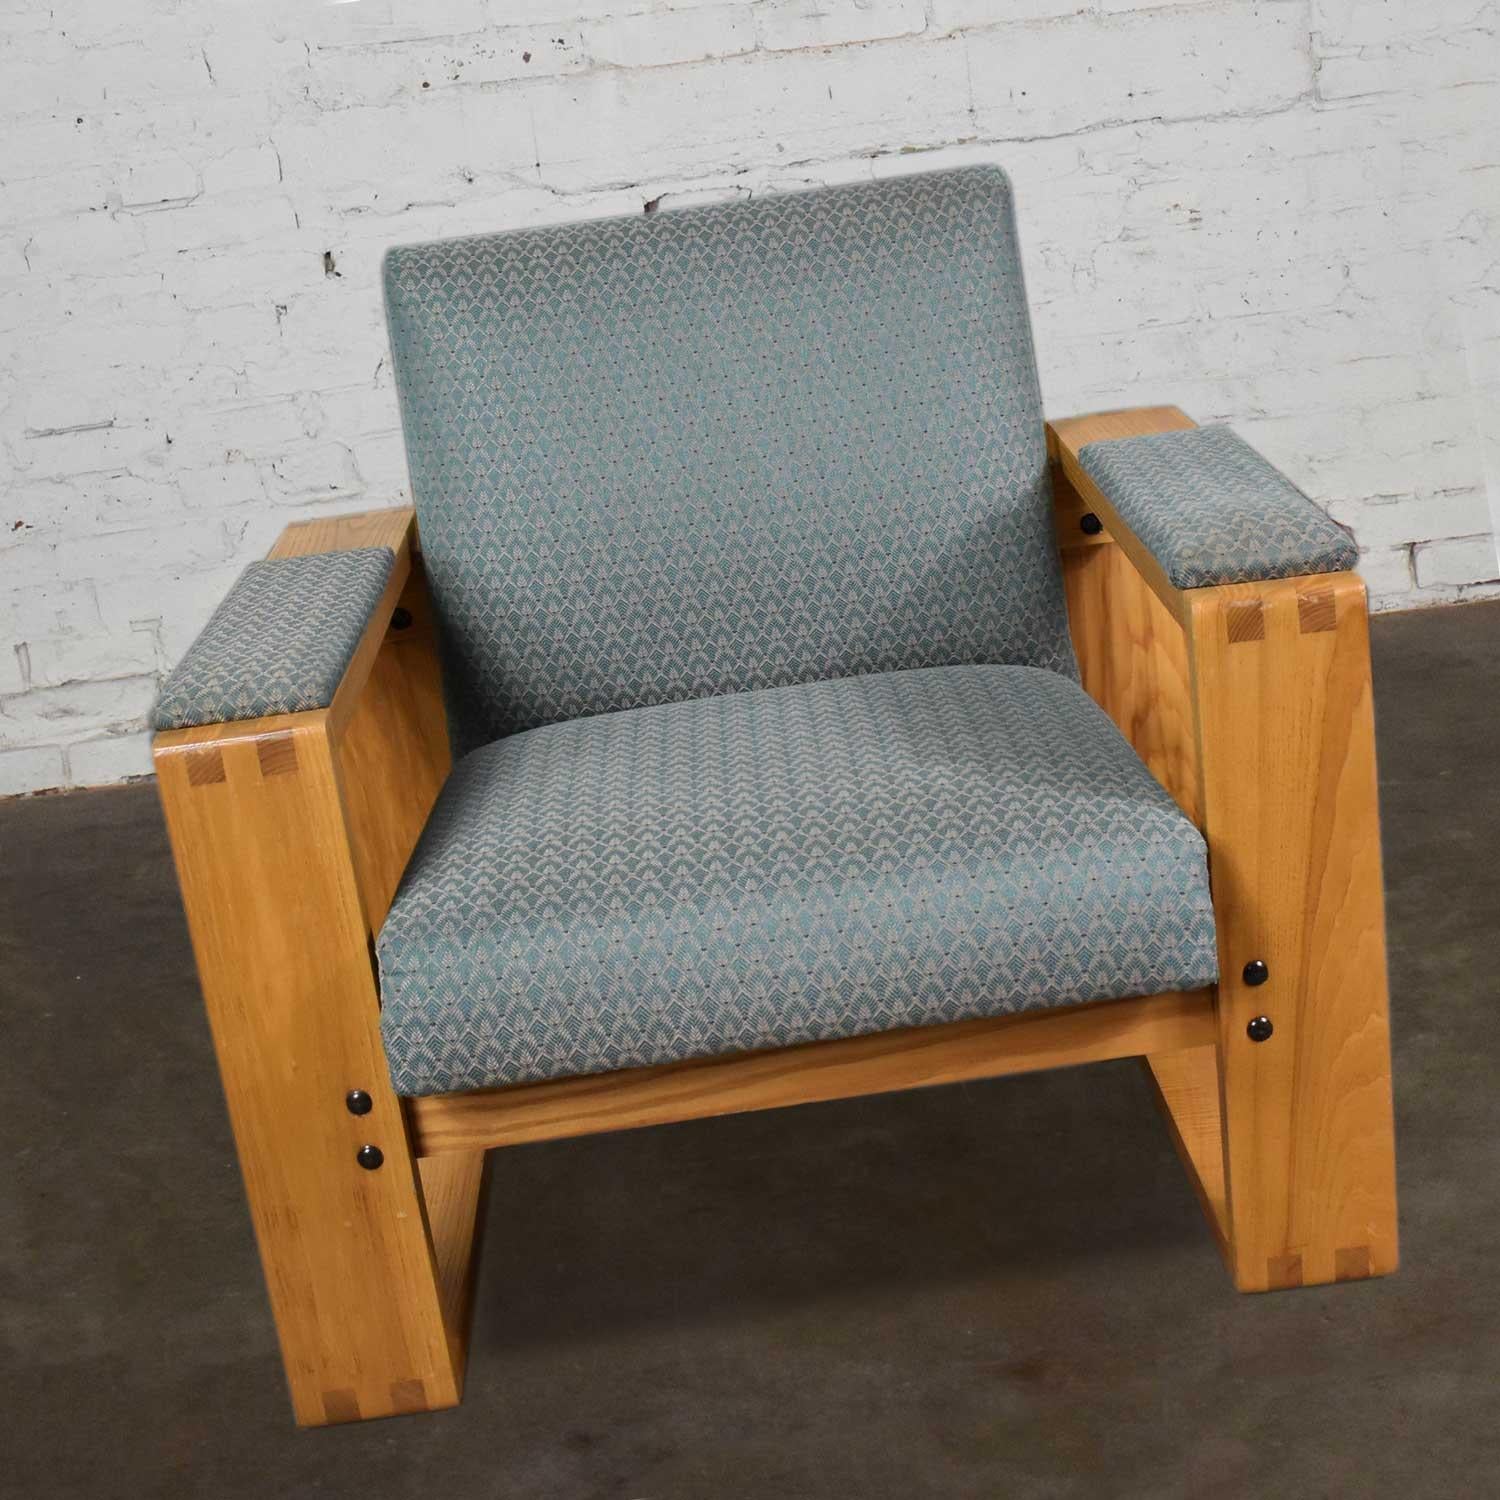 Handsome modern oak open frame club chair with a floating upholstered seat and back. There are eight available and we are pricing them per chair. They are all in good vintage condition. The wood is in wonderful condition but most of the teal fabric